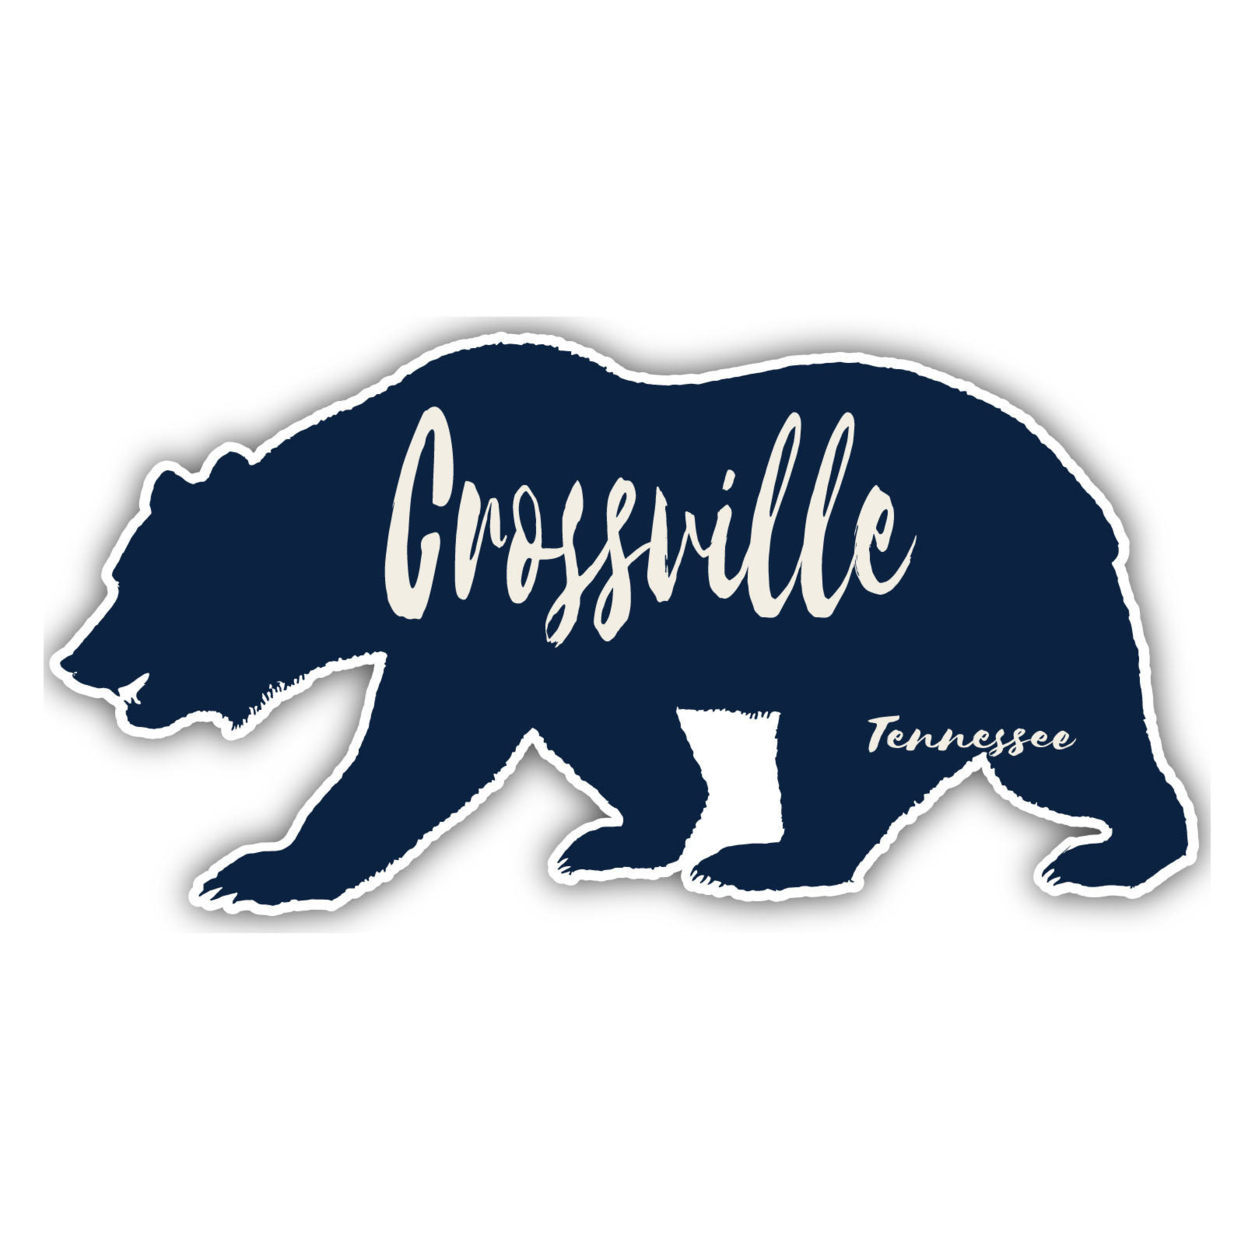 Crossville Tennessee Souvenir Decorative Stickers (Choose Theme And Size) - Single Unit, 10-Inch, Adventures Awaits